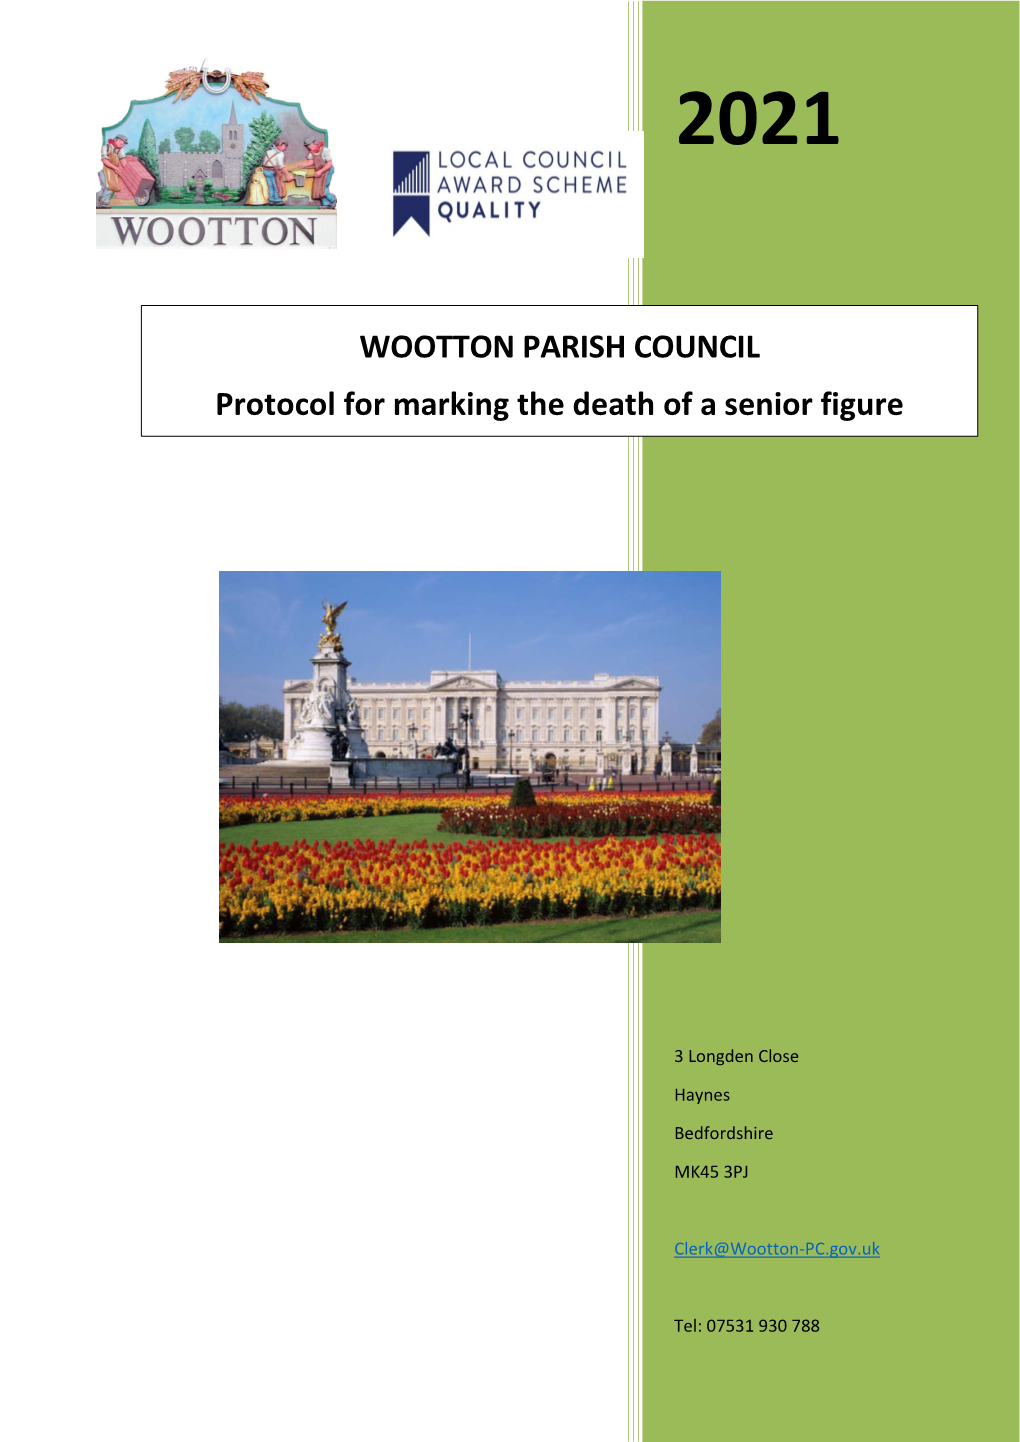 WOOTTON PARISH COUNCIL Protocol for Marking the Death of a Senior Figure